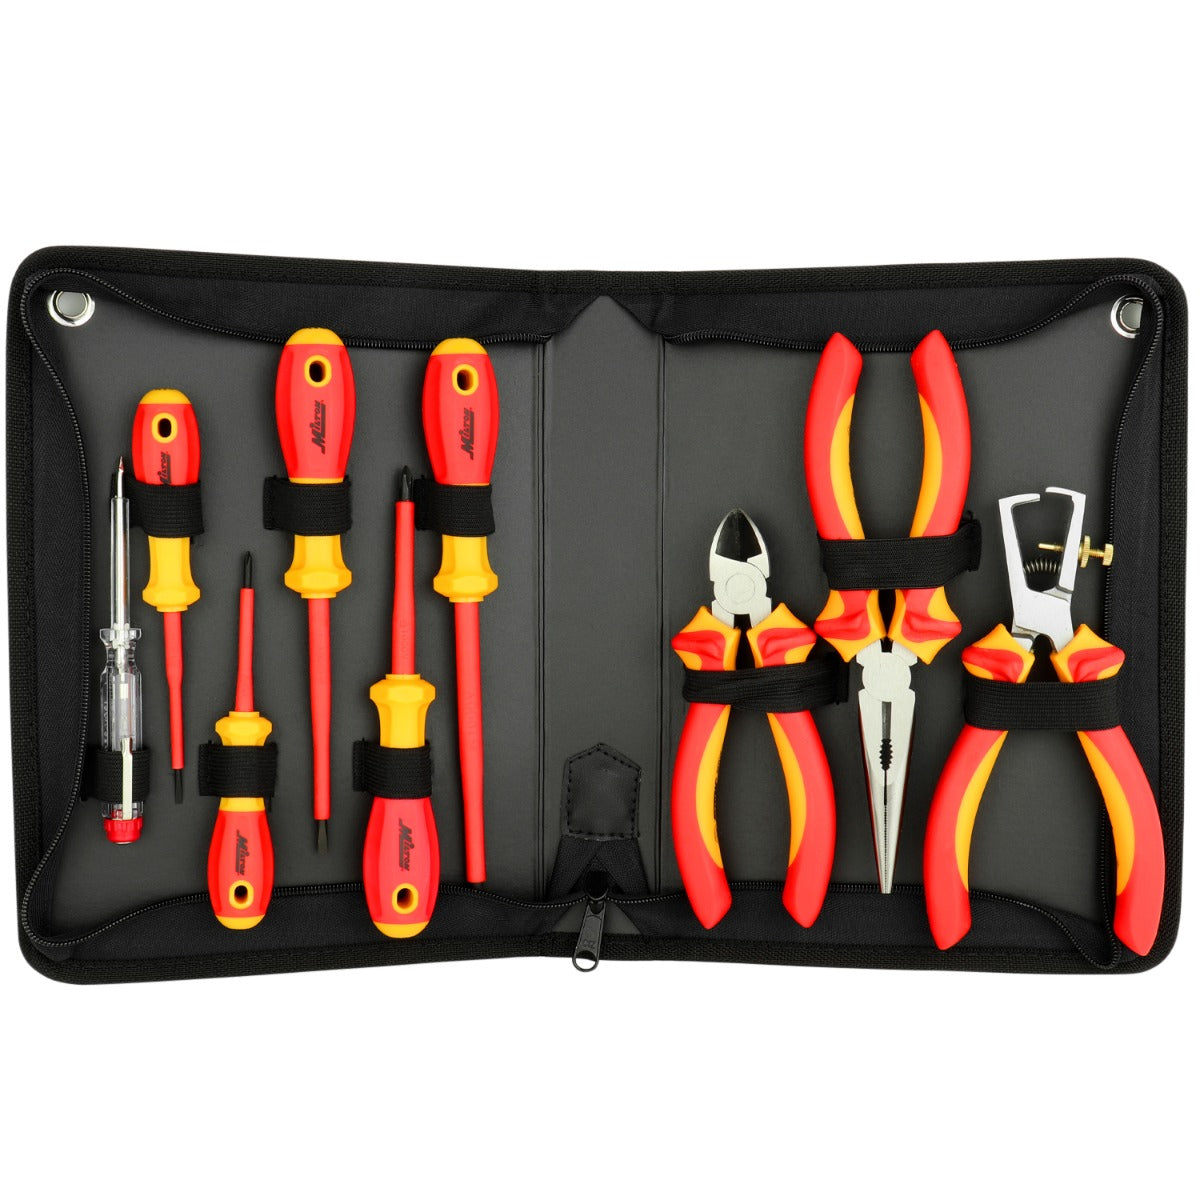 Milton® 9-Piece Insulated Pliers and Screwdrivers Tool Set, Rated 1000V  (EV02)